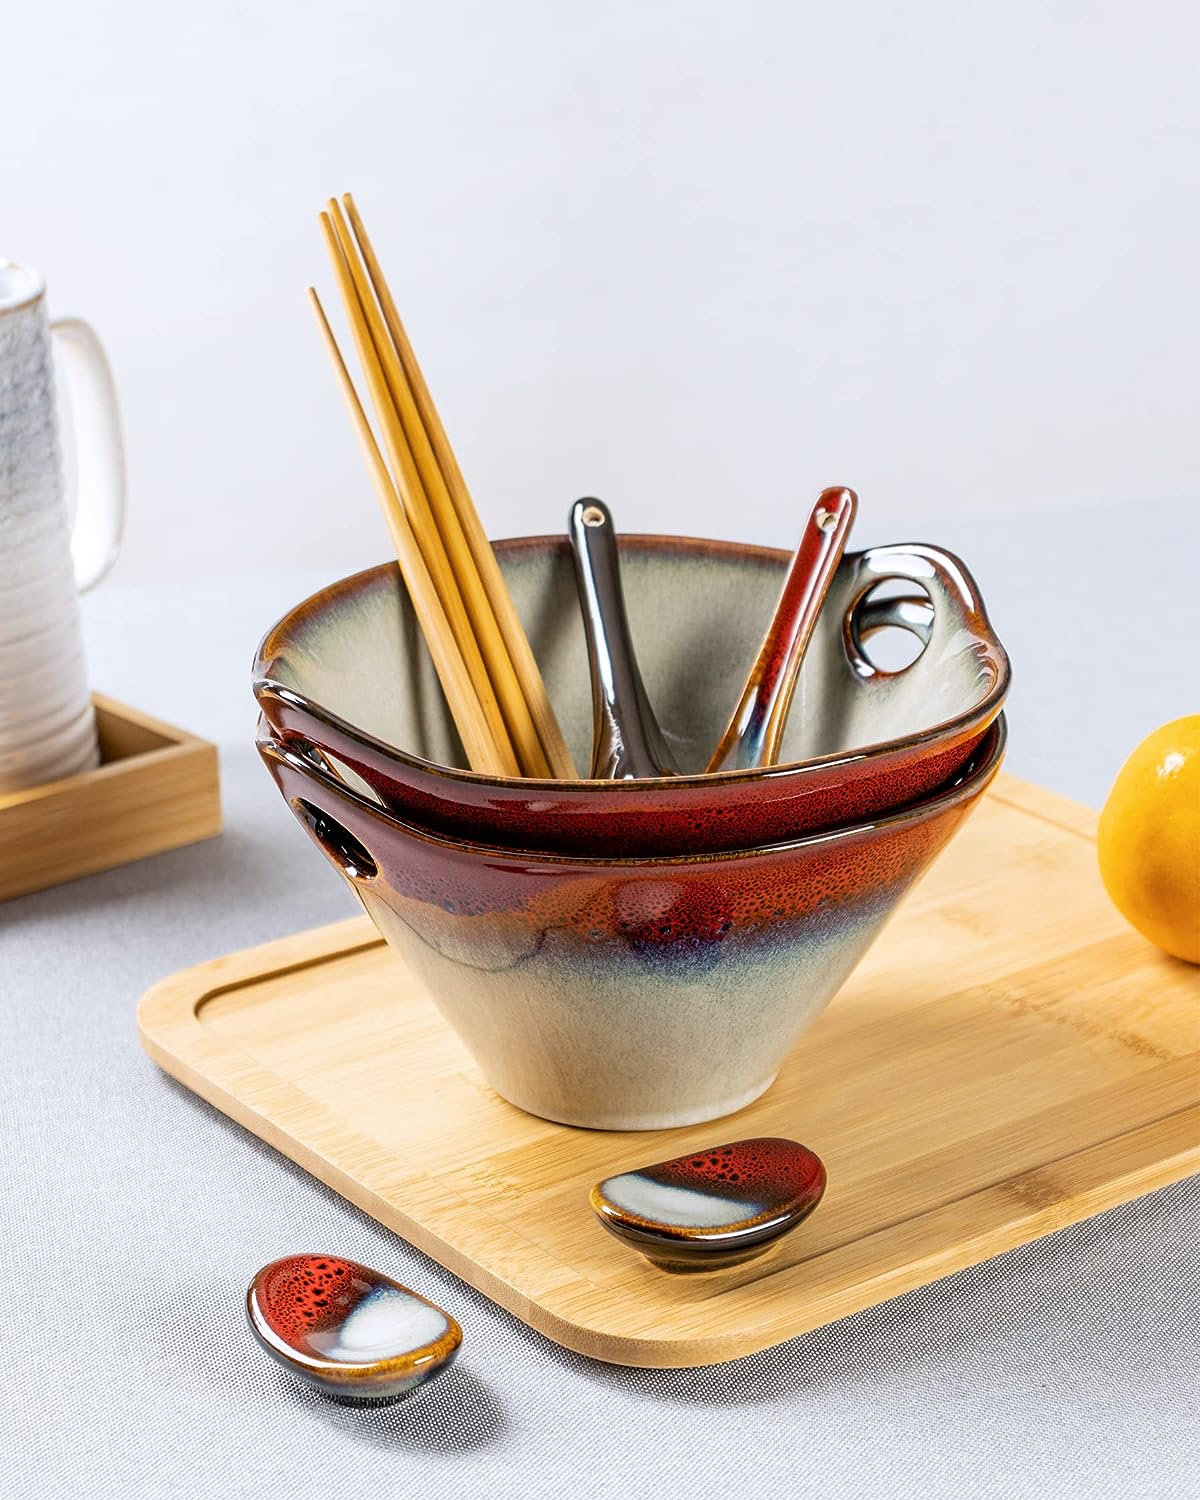 1 Set(4 PCS) Ceramic Japanese Ramen Bowls for Soup, Noodle, Pho, Udon and  Soba, with Matching Spoons, Chopsticks and Racks